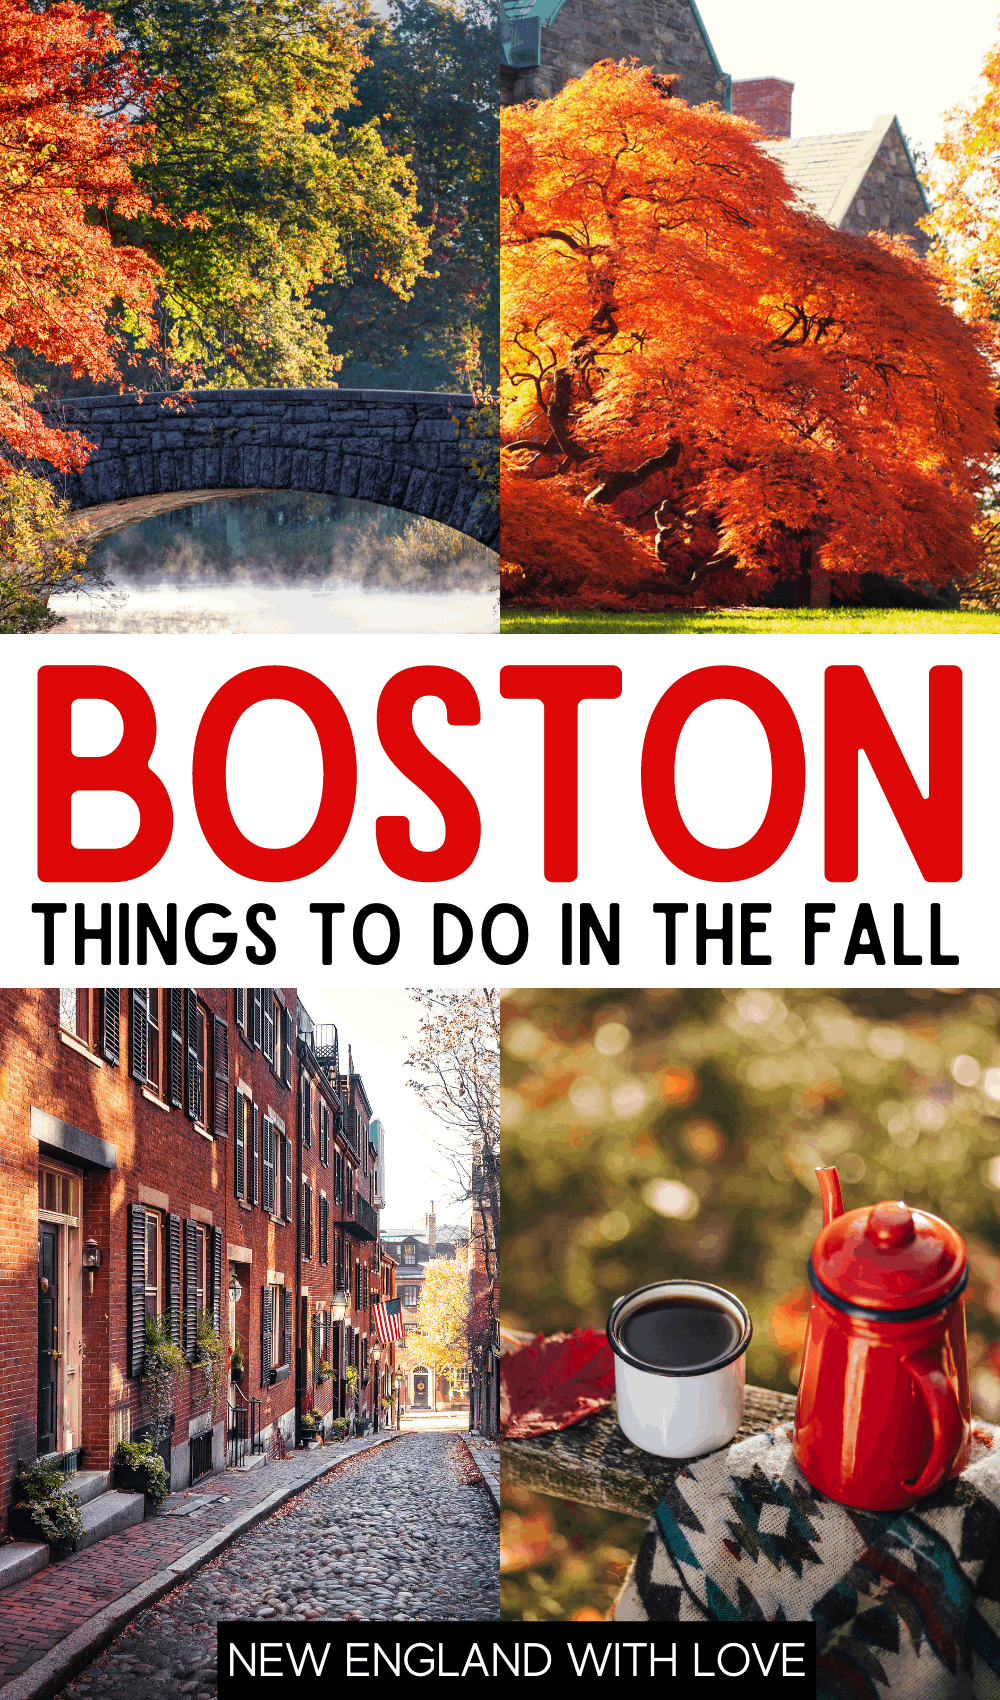 Pinterest graphic reading "BOSTON THINGS TO DO IN THE FALL"